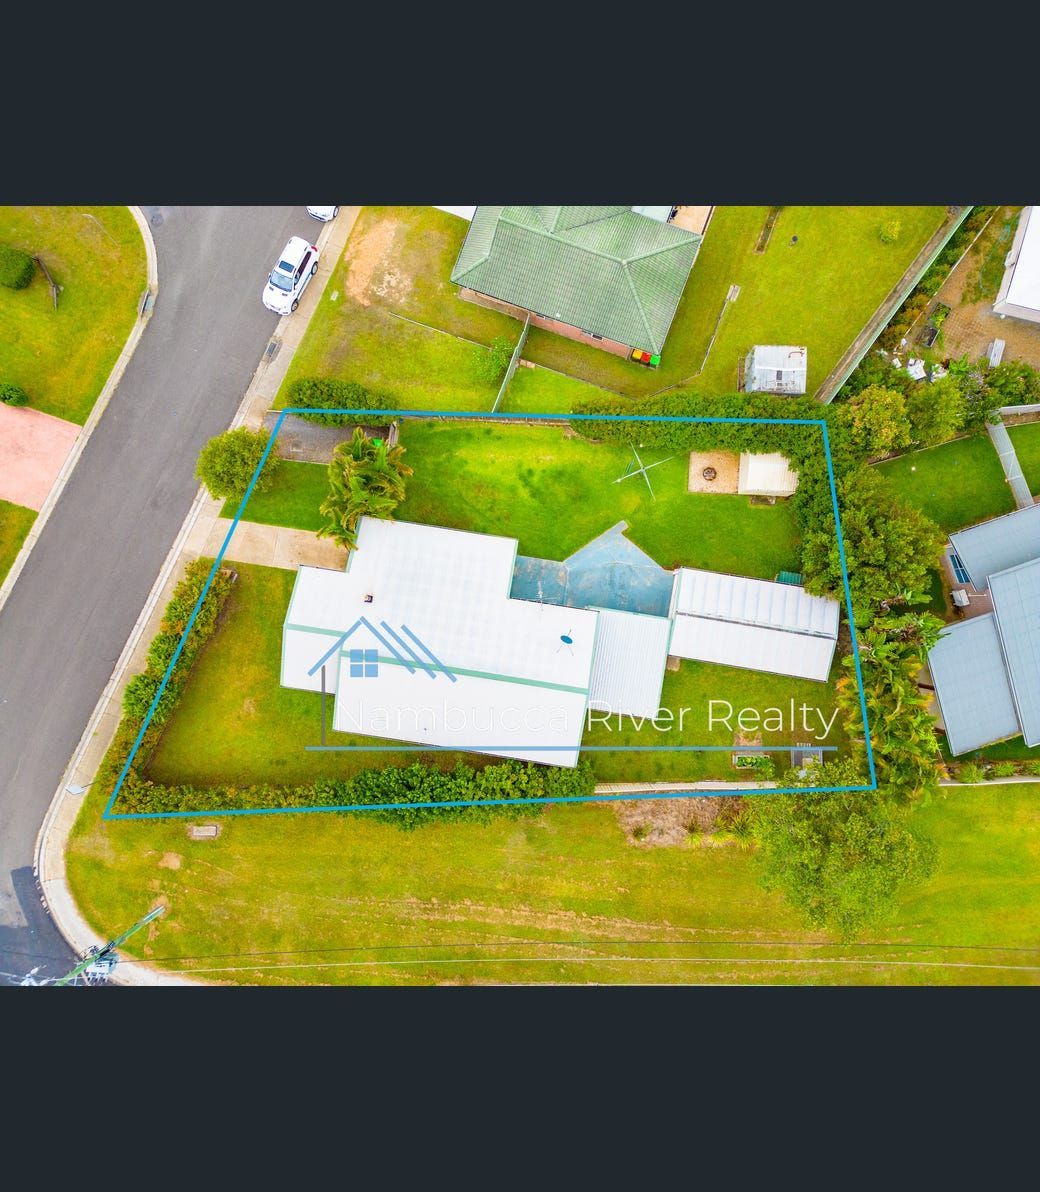 House for sale - 2 Grant Crescent, Macksville, NSW 2447
 by Nambucca River Realty